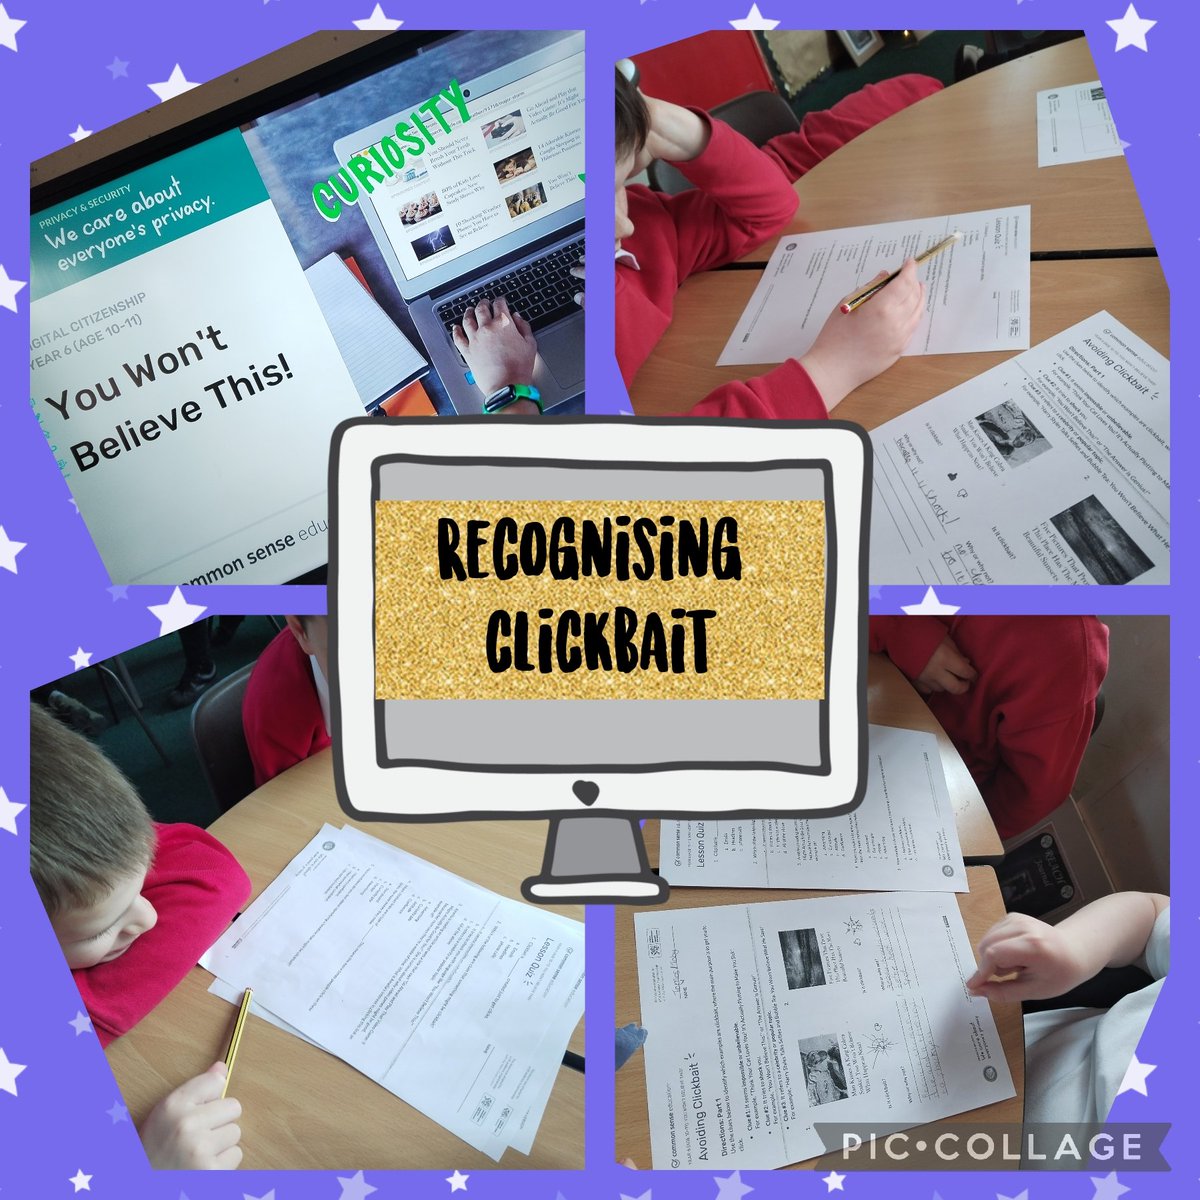 Today we discussed how to recognise clickbait and talked about the curiosity gap in different examples. 💻🖱️We ended with a quiz to test our knowledge! 📝⭐ @GlyncoedP @JoanneWeightman @gartmor @EAS_Digital #GPSREACH @GpsMrsCross2